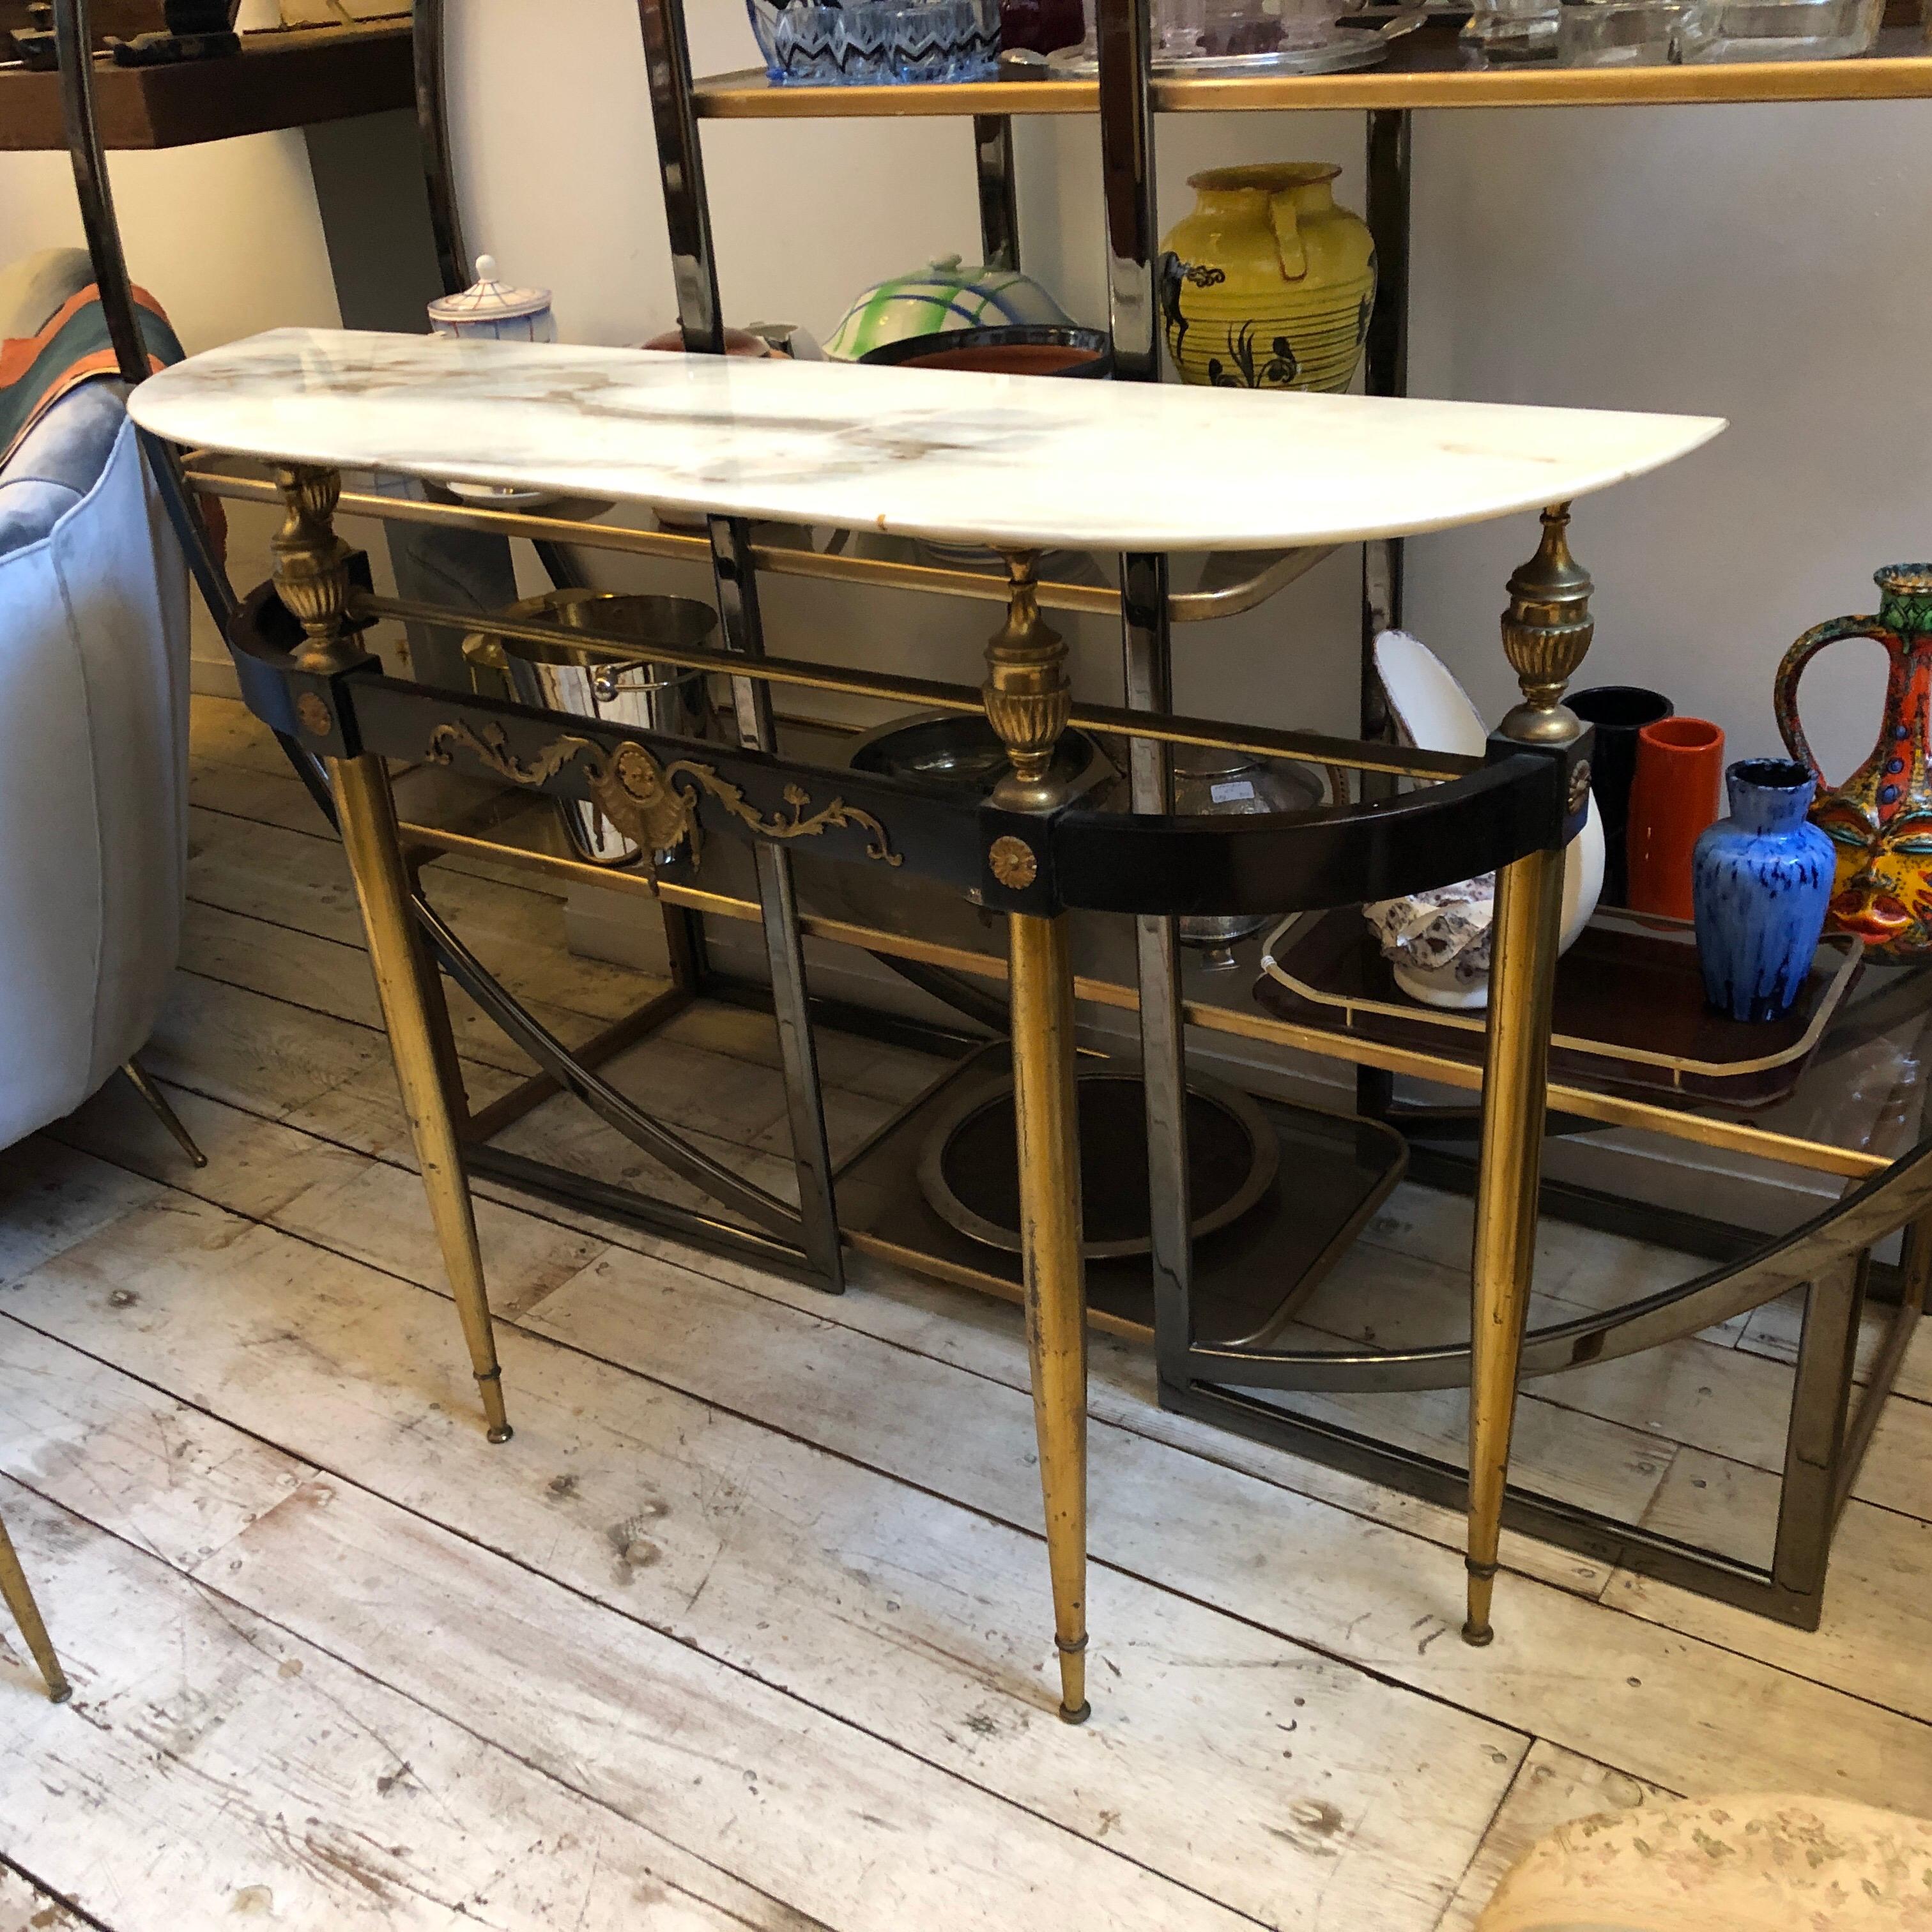 A mahogany, brass and iron console made in Italy in the 1960s, original Carrara marble top, good conditions overall.